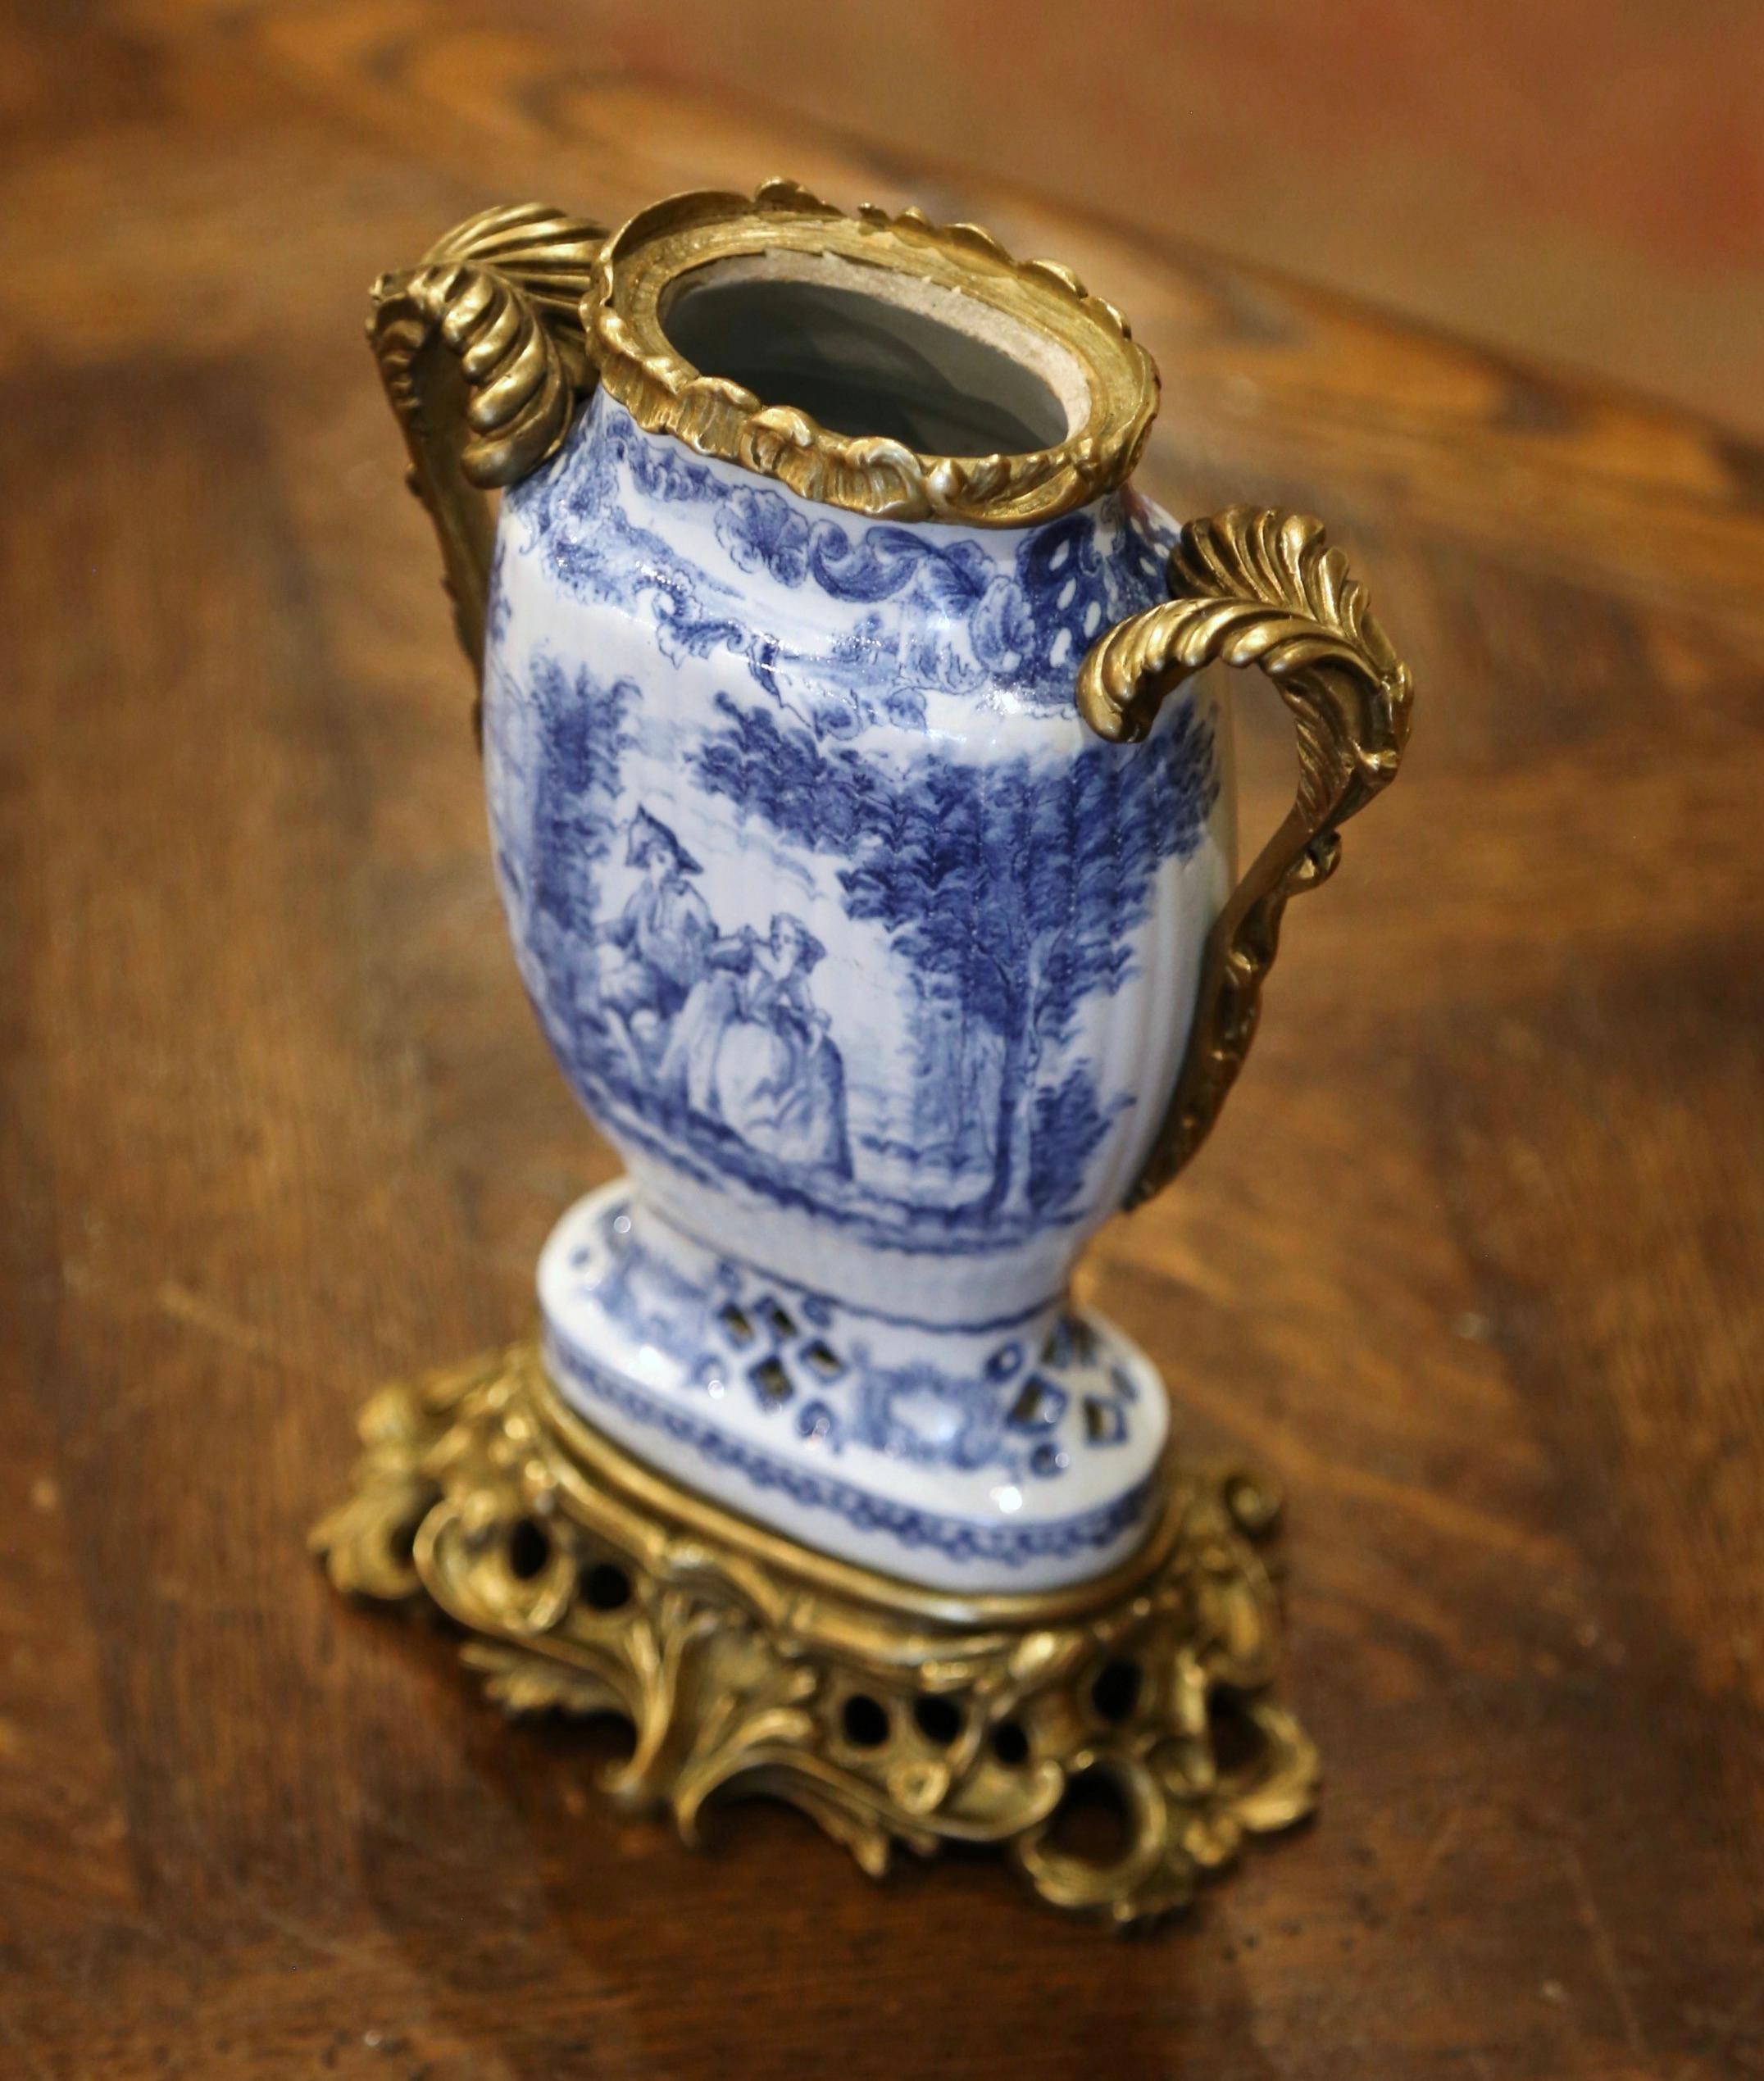 Crafted in Holland, circa 1870, the antique faience vase stands on an intricate bronze stand dressed with two decorative handles and embellished with a bronze rim. The vase is decorated with a hand painted blue and white courting scene medallion on